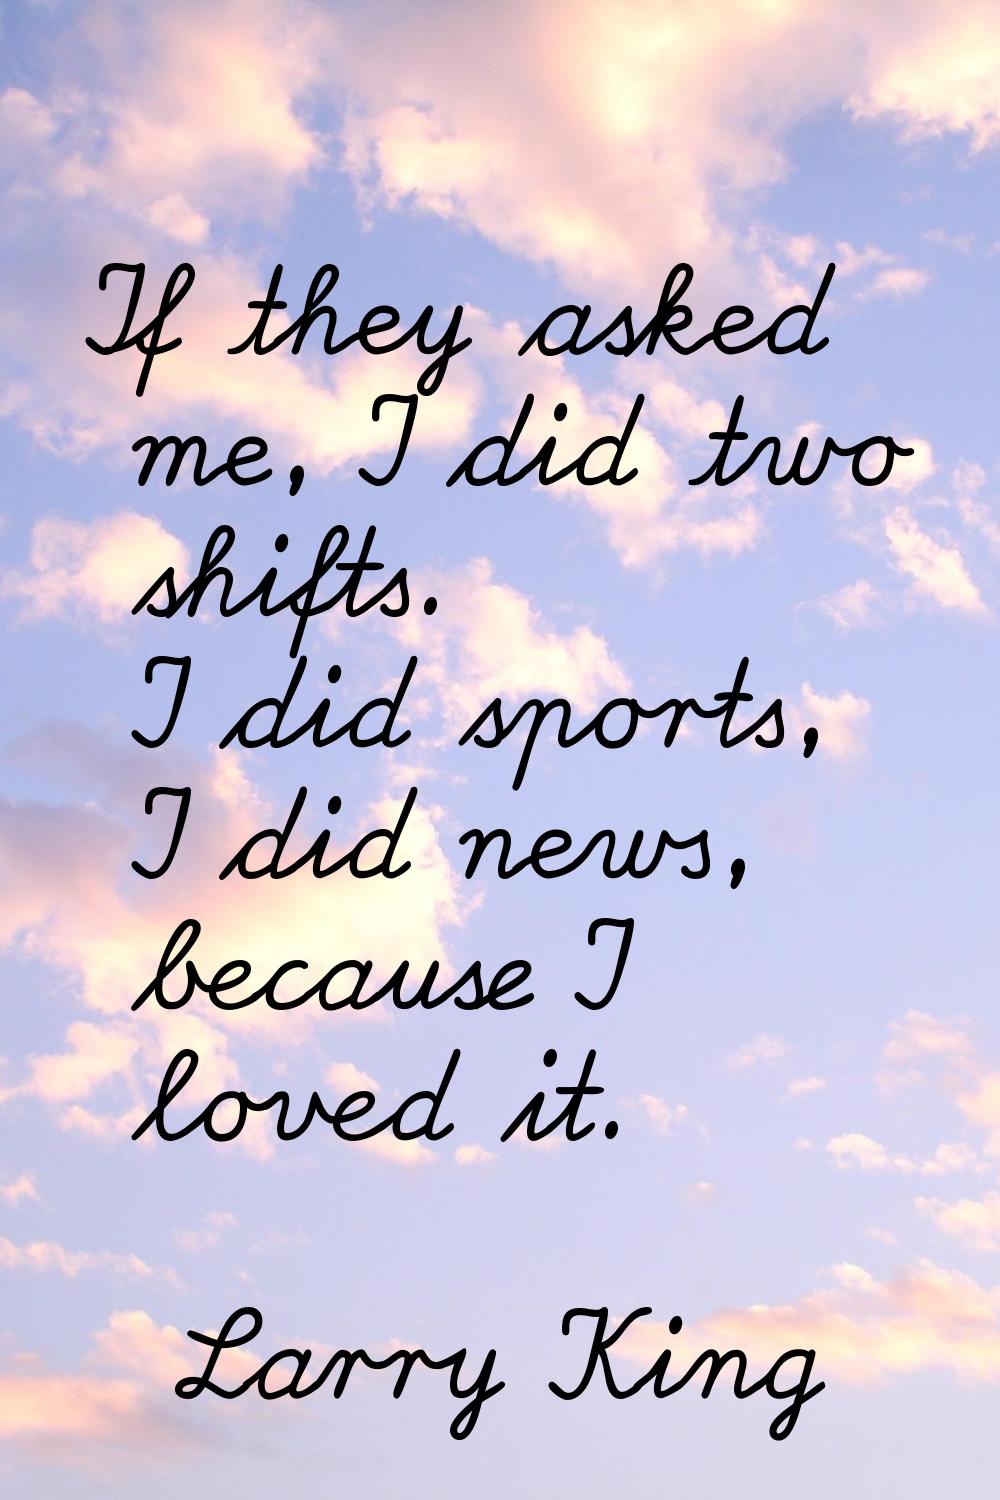 If they asked me, I did two shifts. I did sports, I did news, because I loved it.